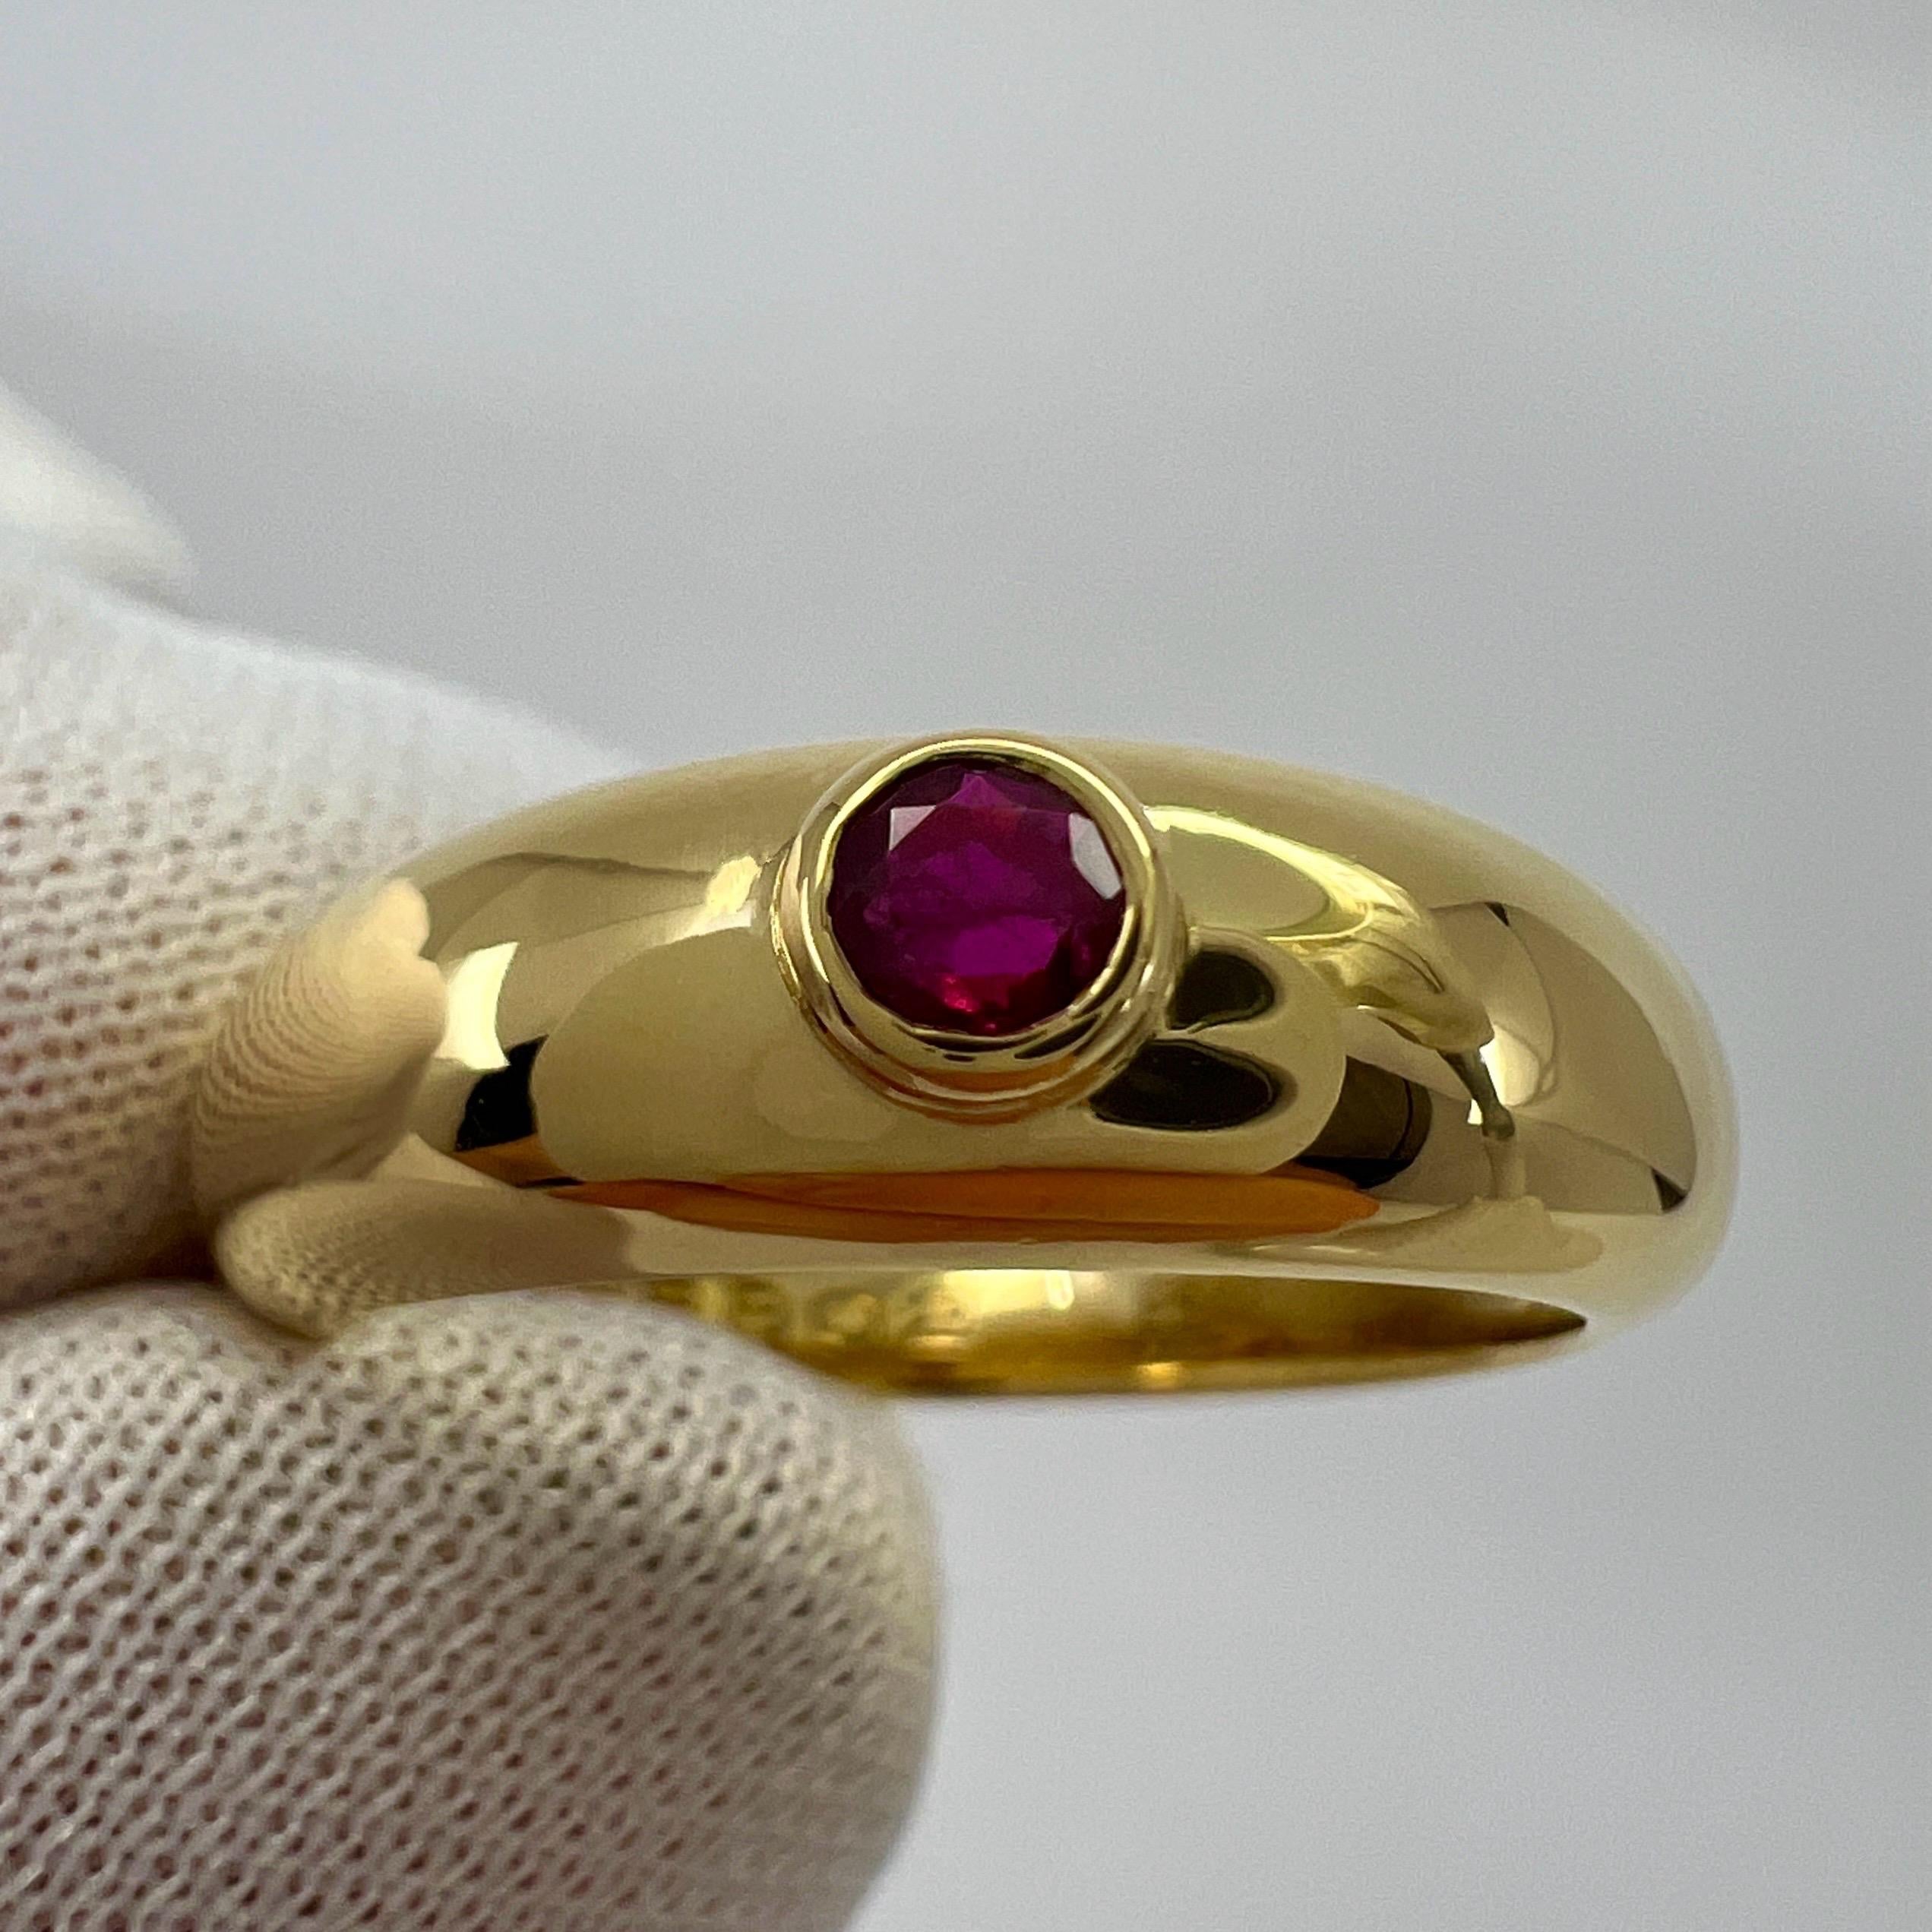 Vintage Cartier Round Cut Red Ruby 18k Yellow Gold Signet Style Domed Ring US5.5 For Sale 2